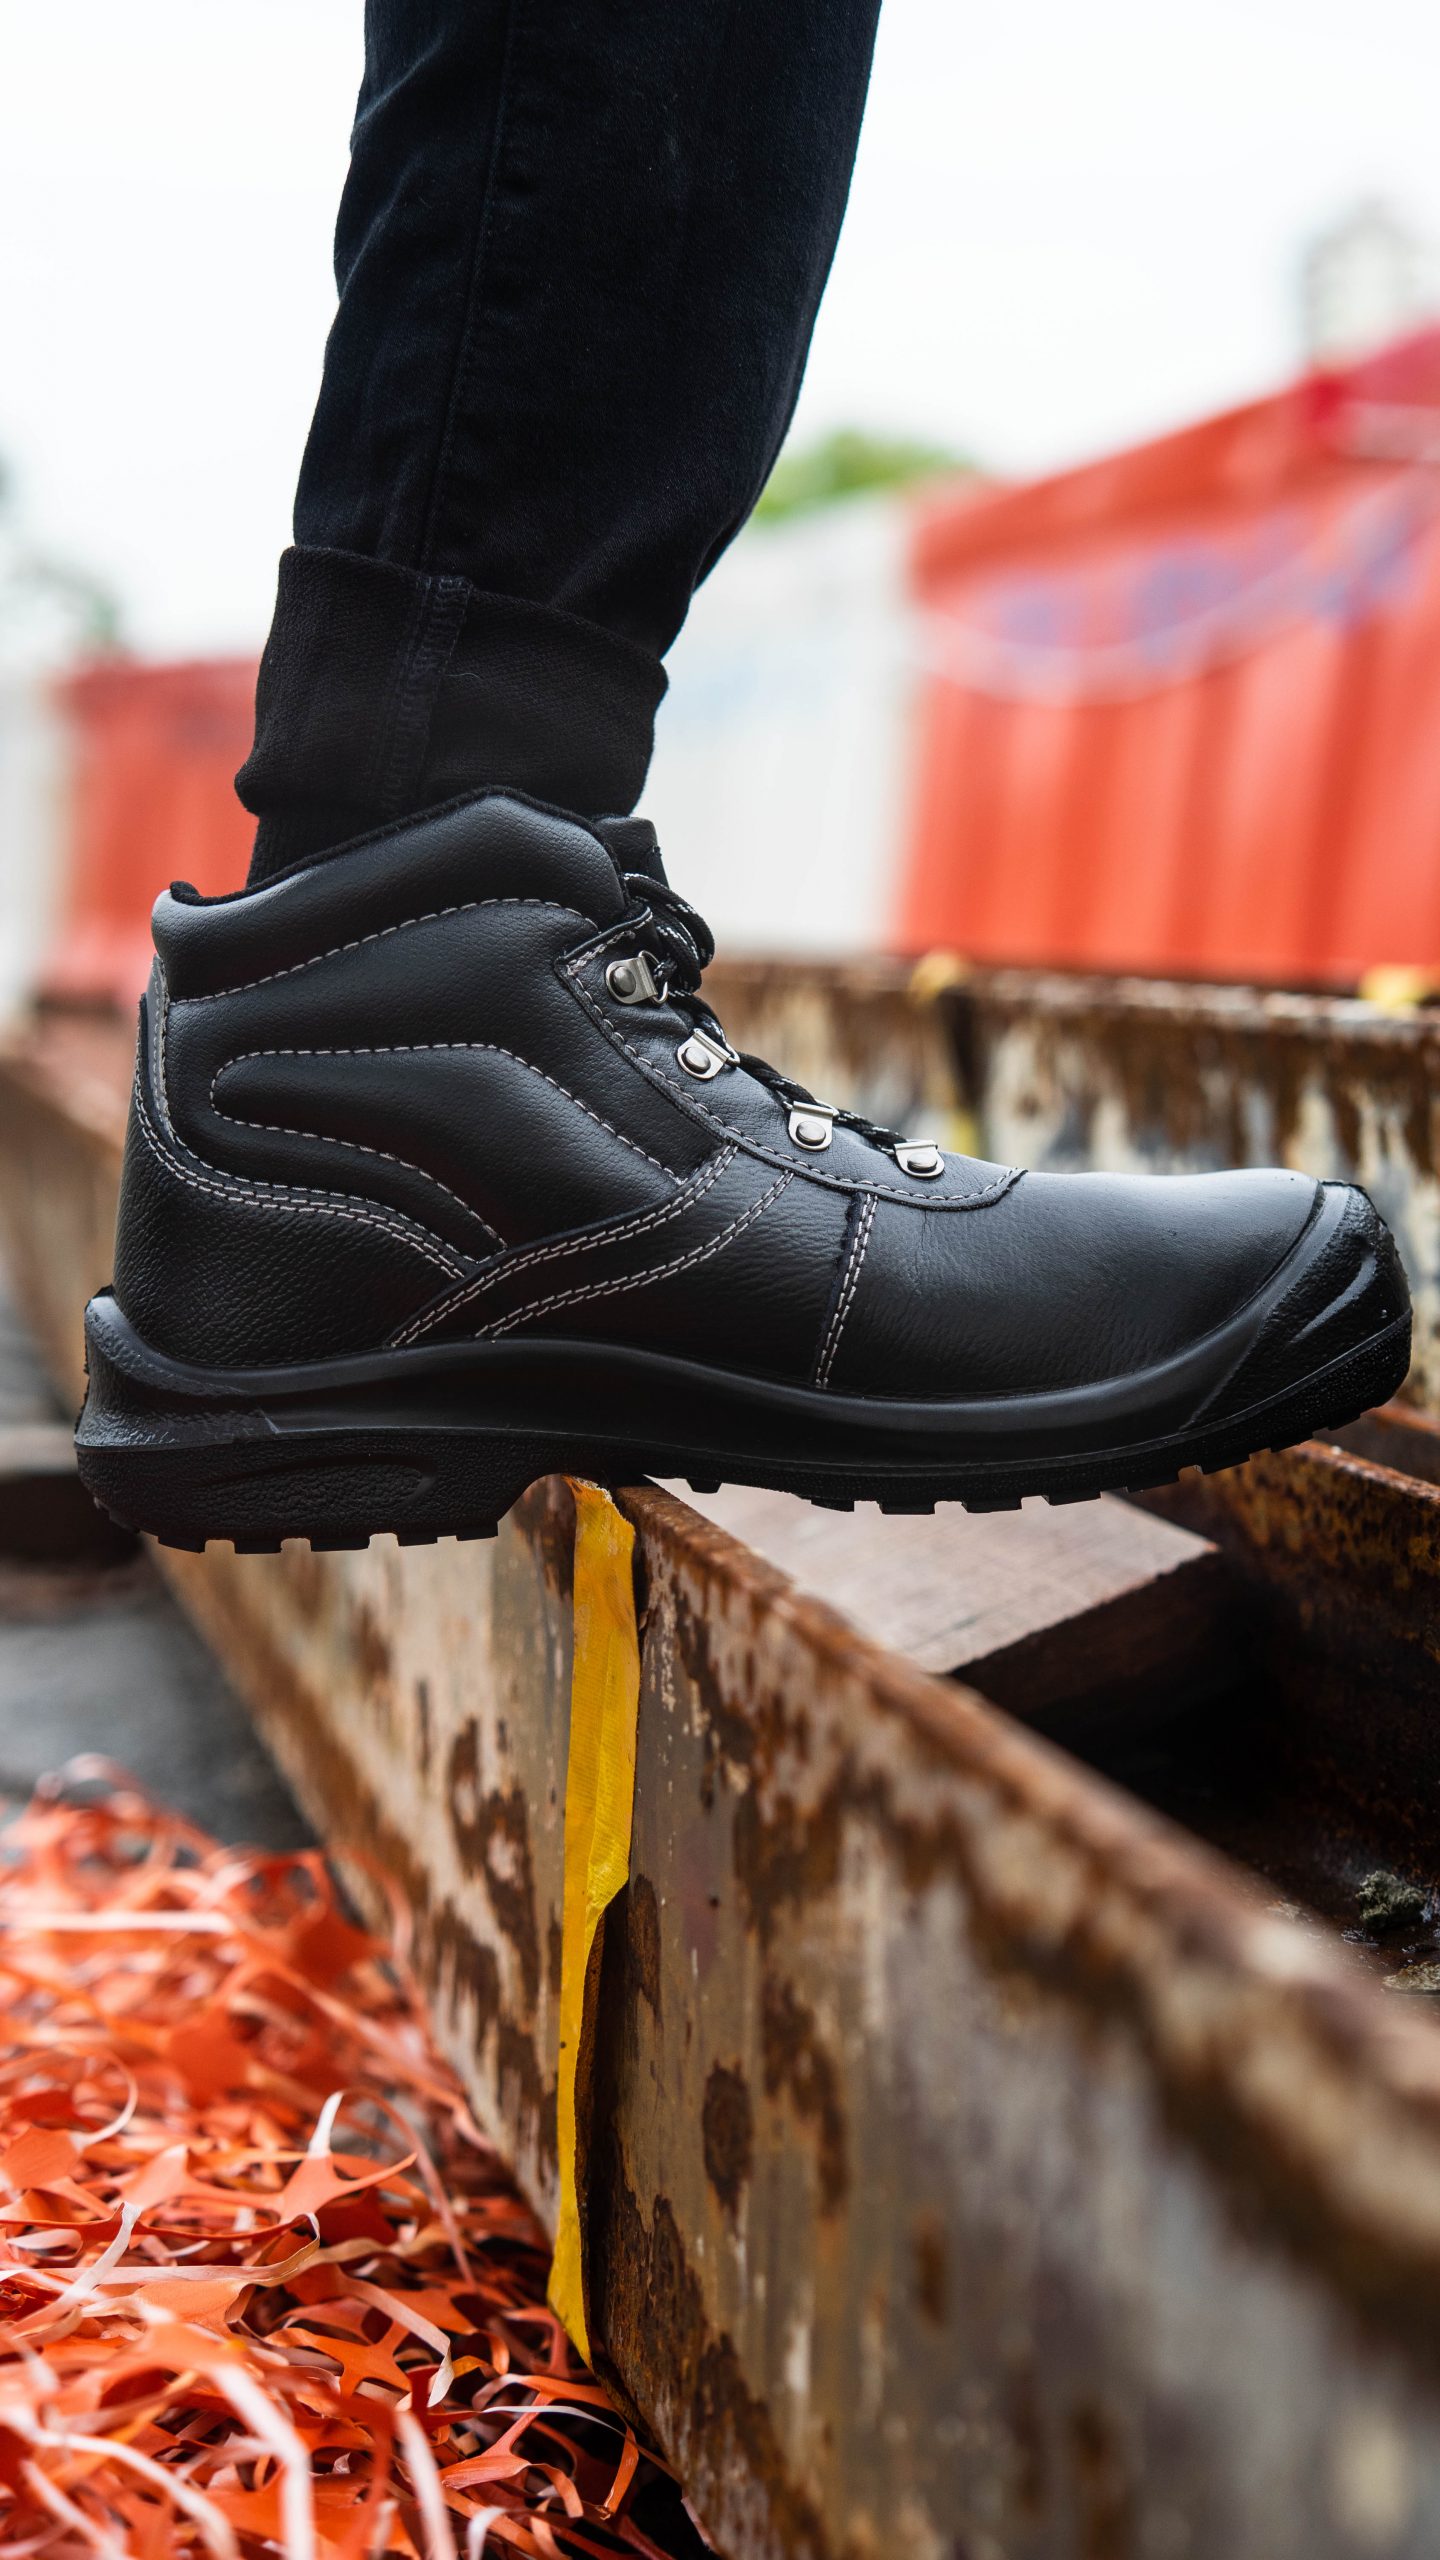 safety shoes for men industrial, construction, kitchen ,waterproof,electrical,safety shoes for men stylish Boots